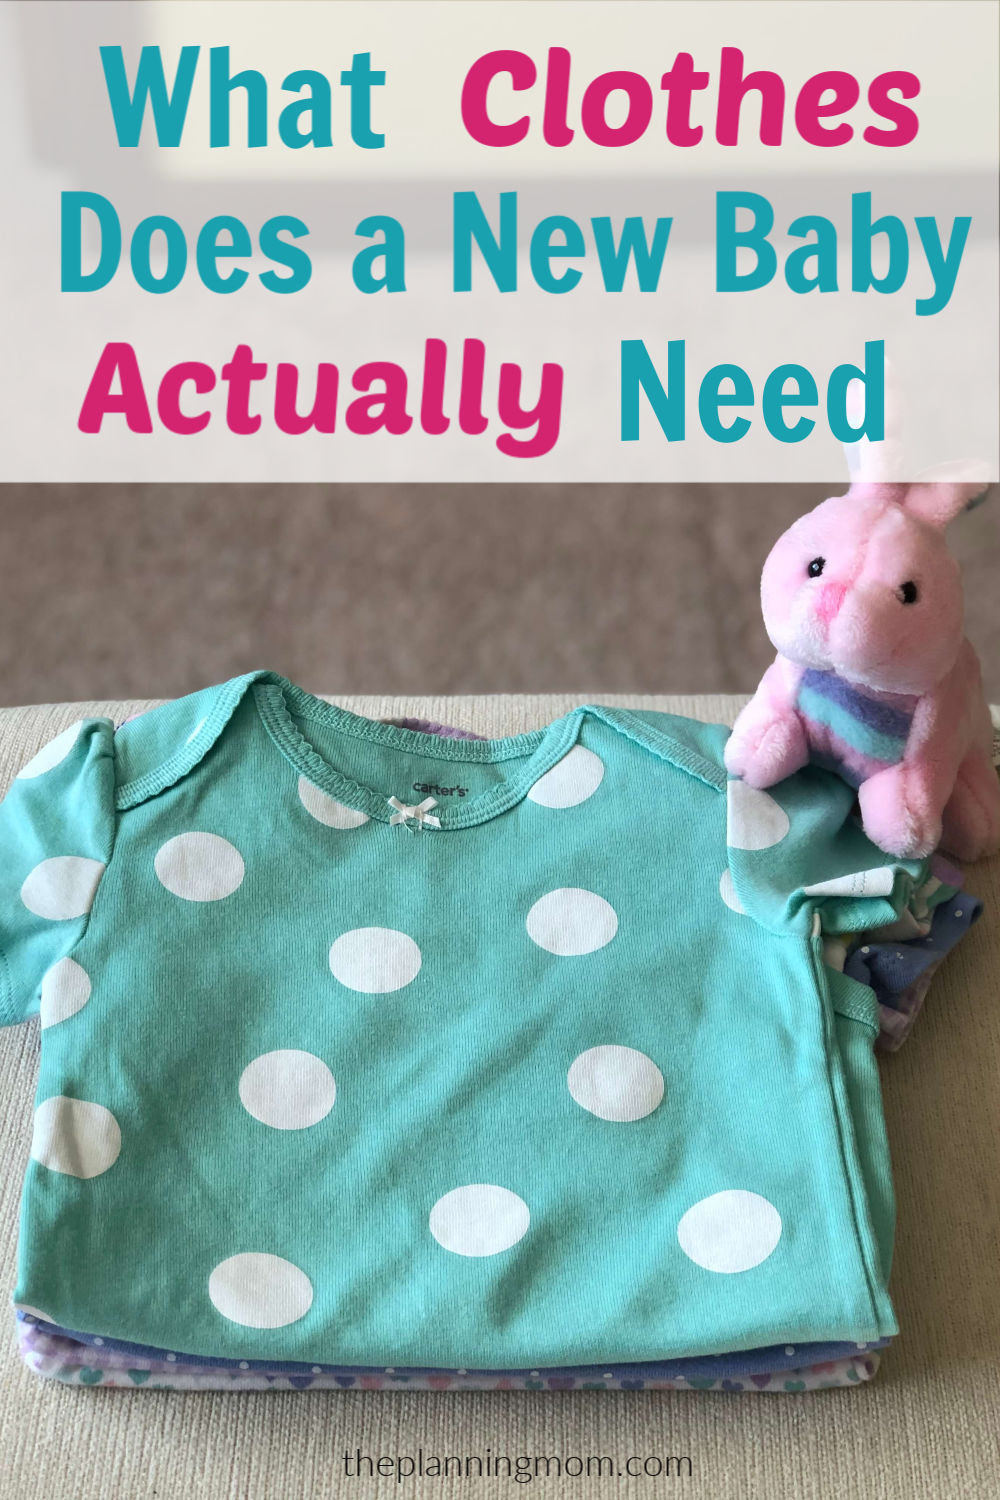 What Clothes Does a New Baby Actually Need - The Planning Mom